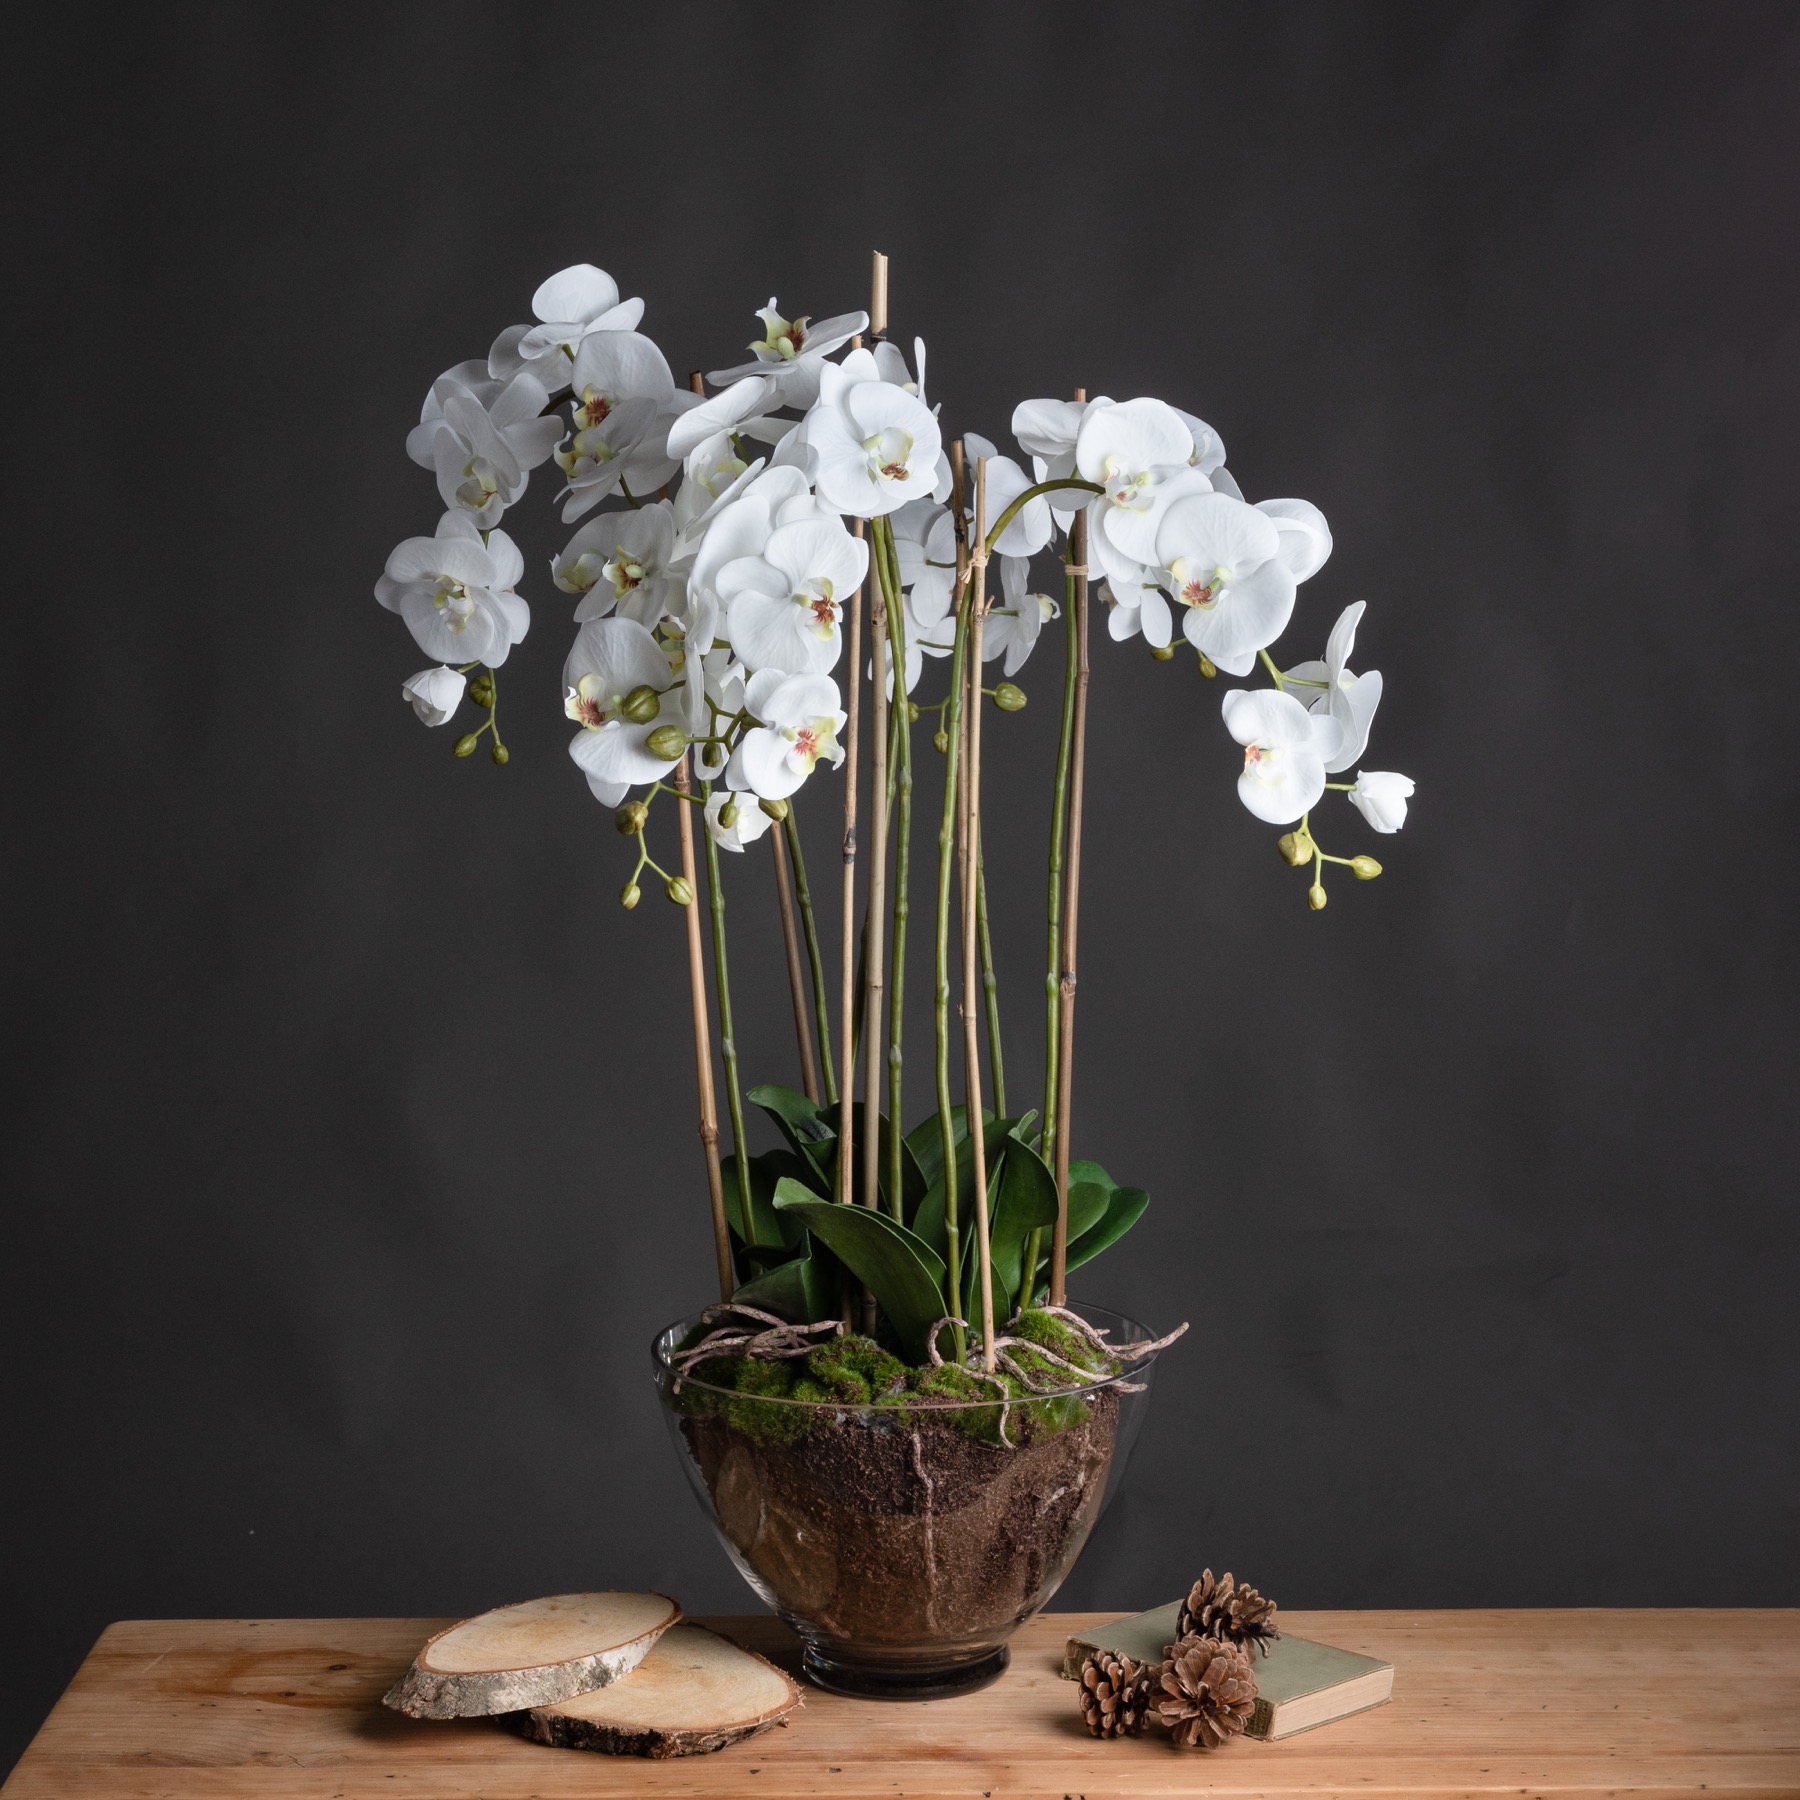 Large White Orchid In Glass Pot - Image 1